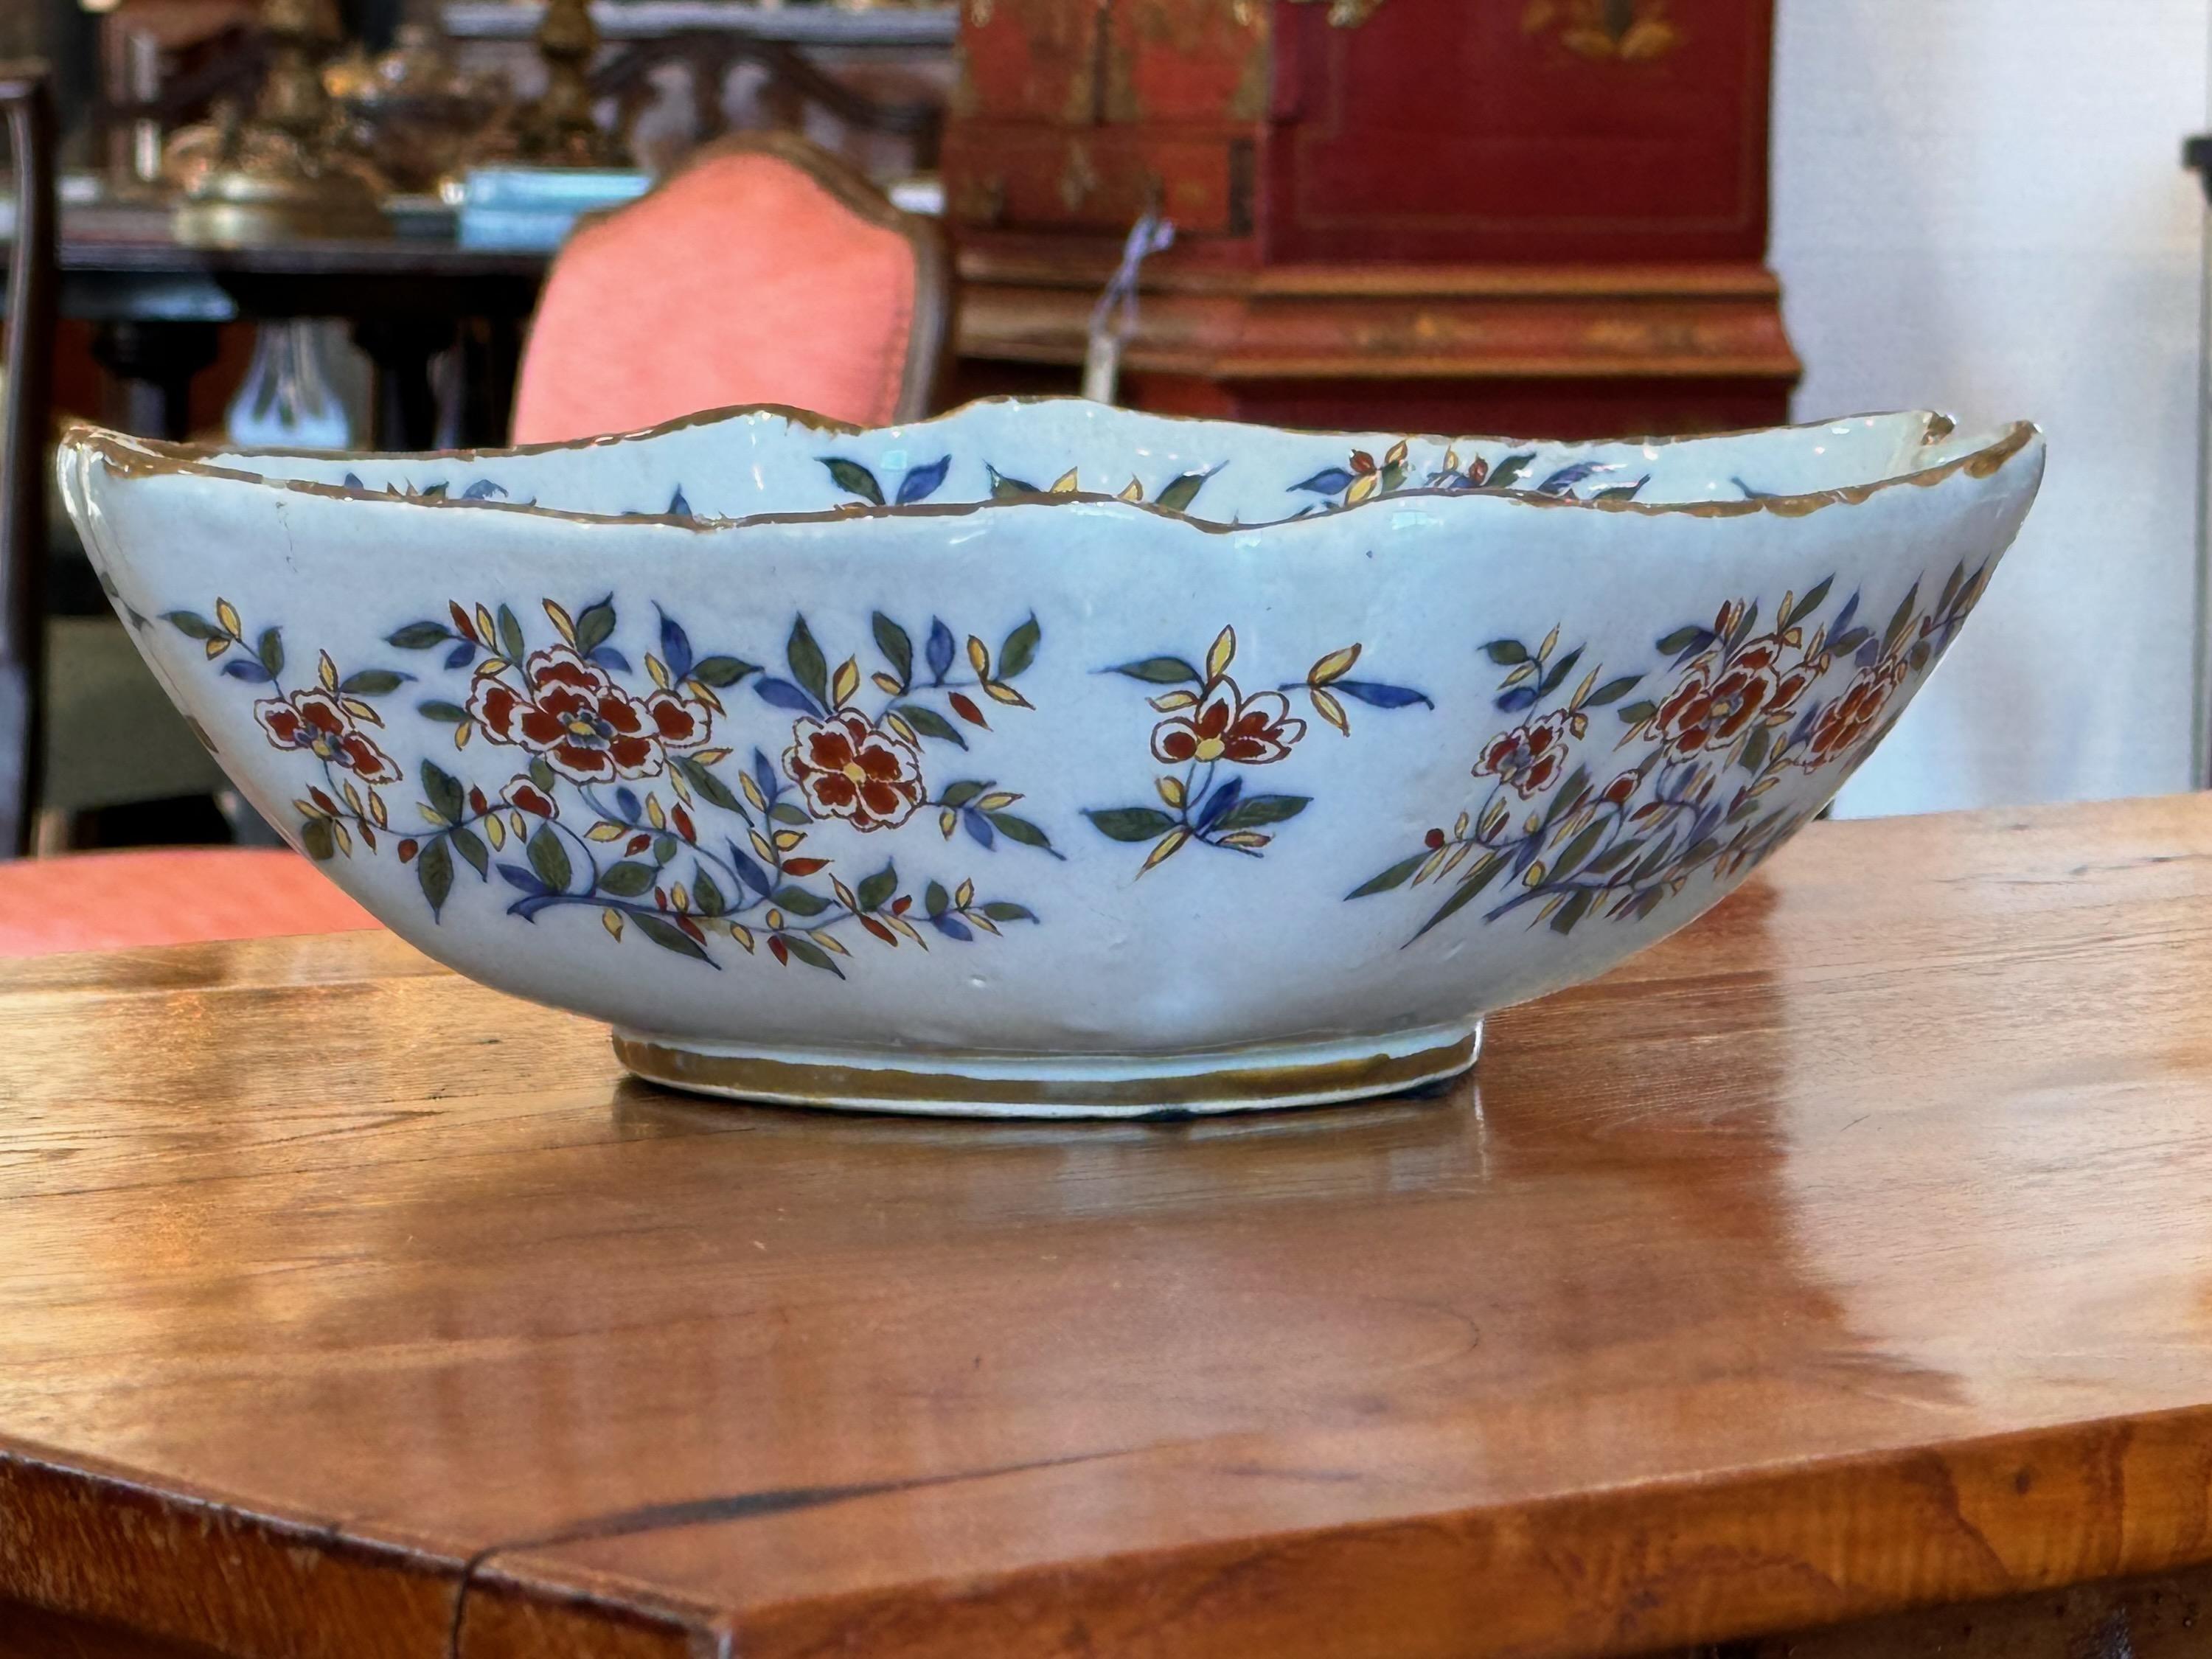 A beautiful bowl with Asian decoration. Perfect for hall table to hold those keys.